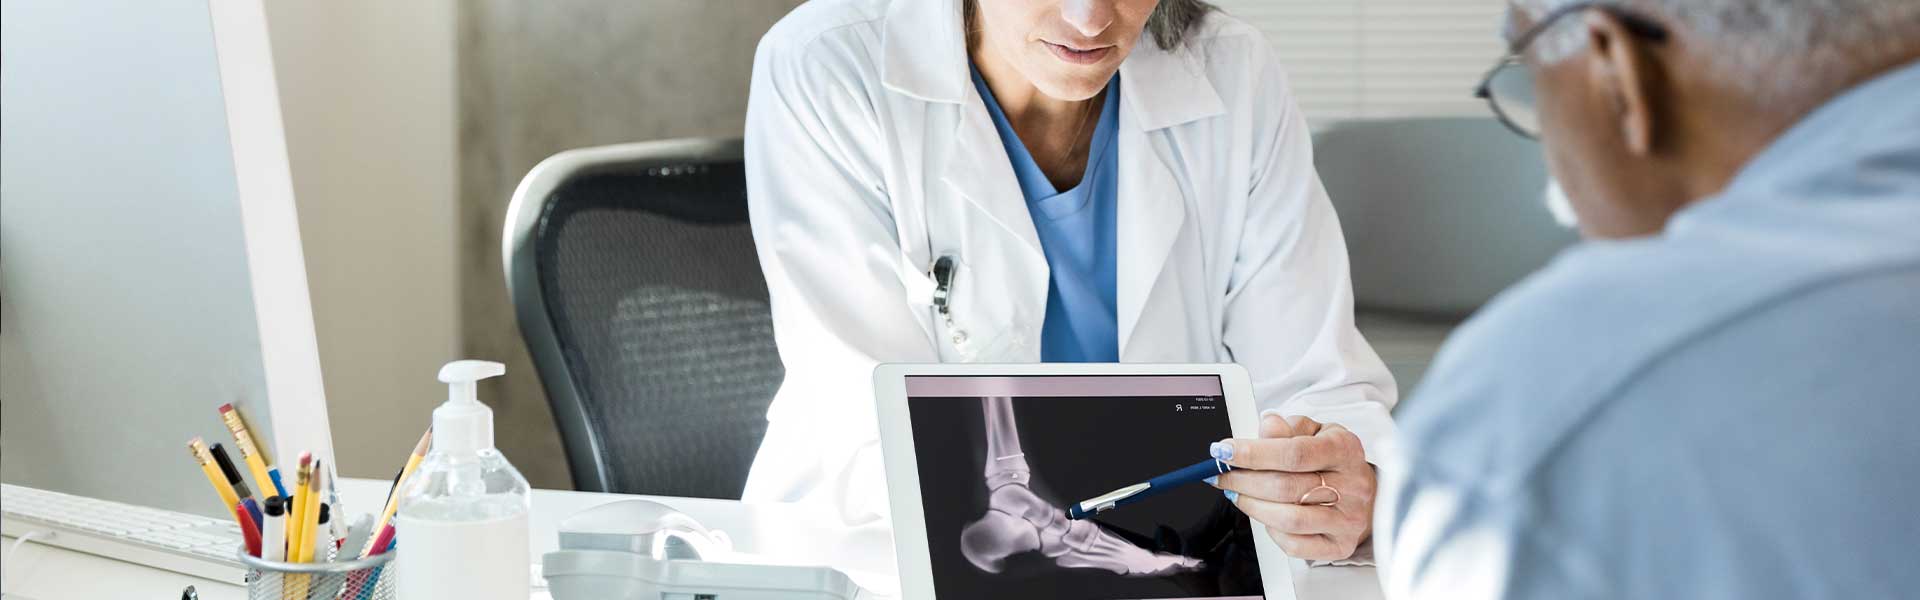 doctor showing patient foot xray